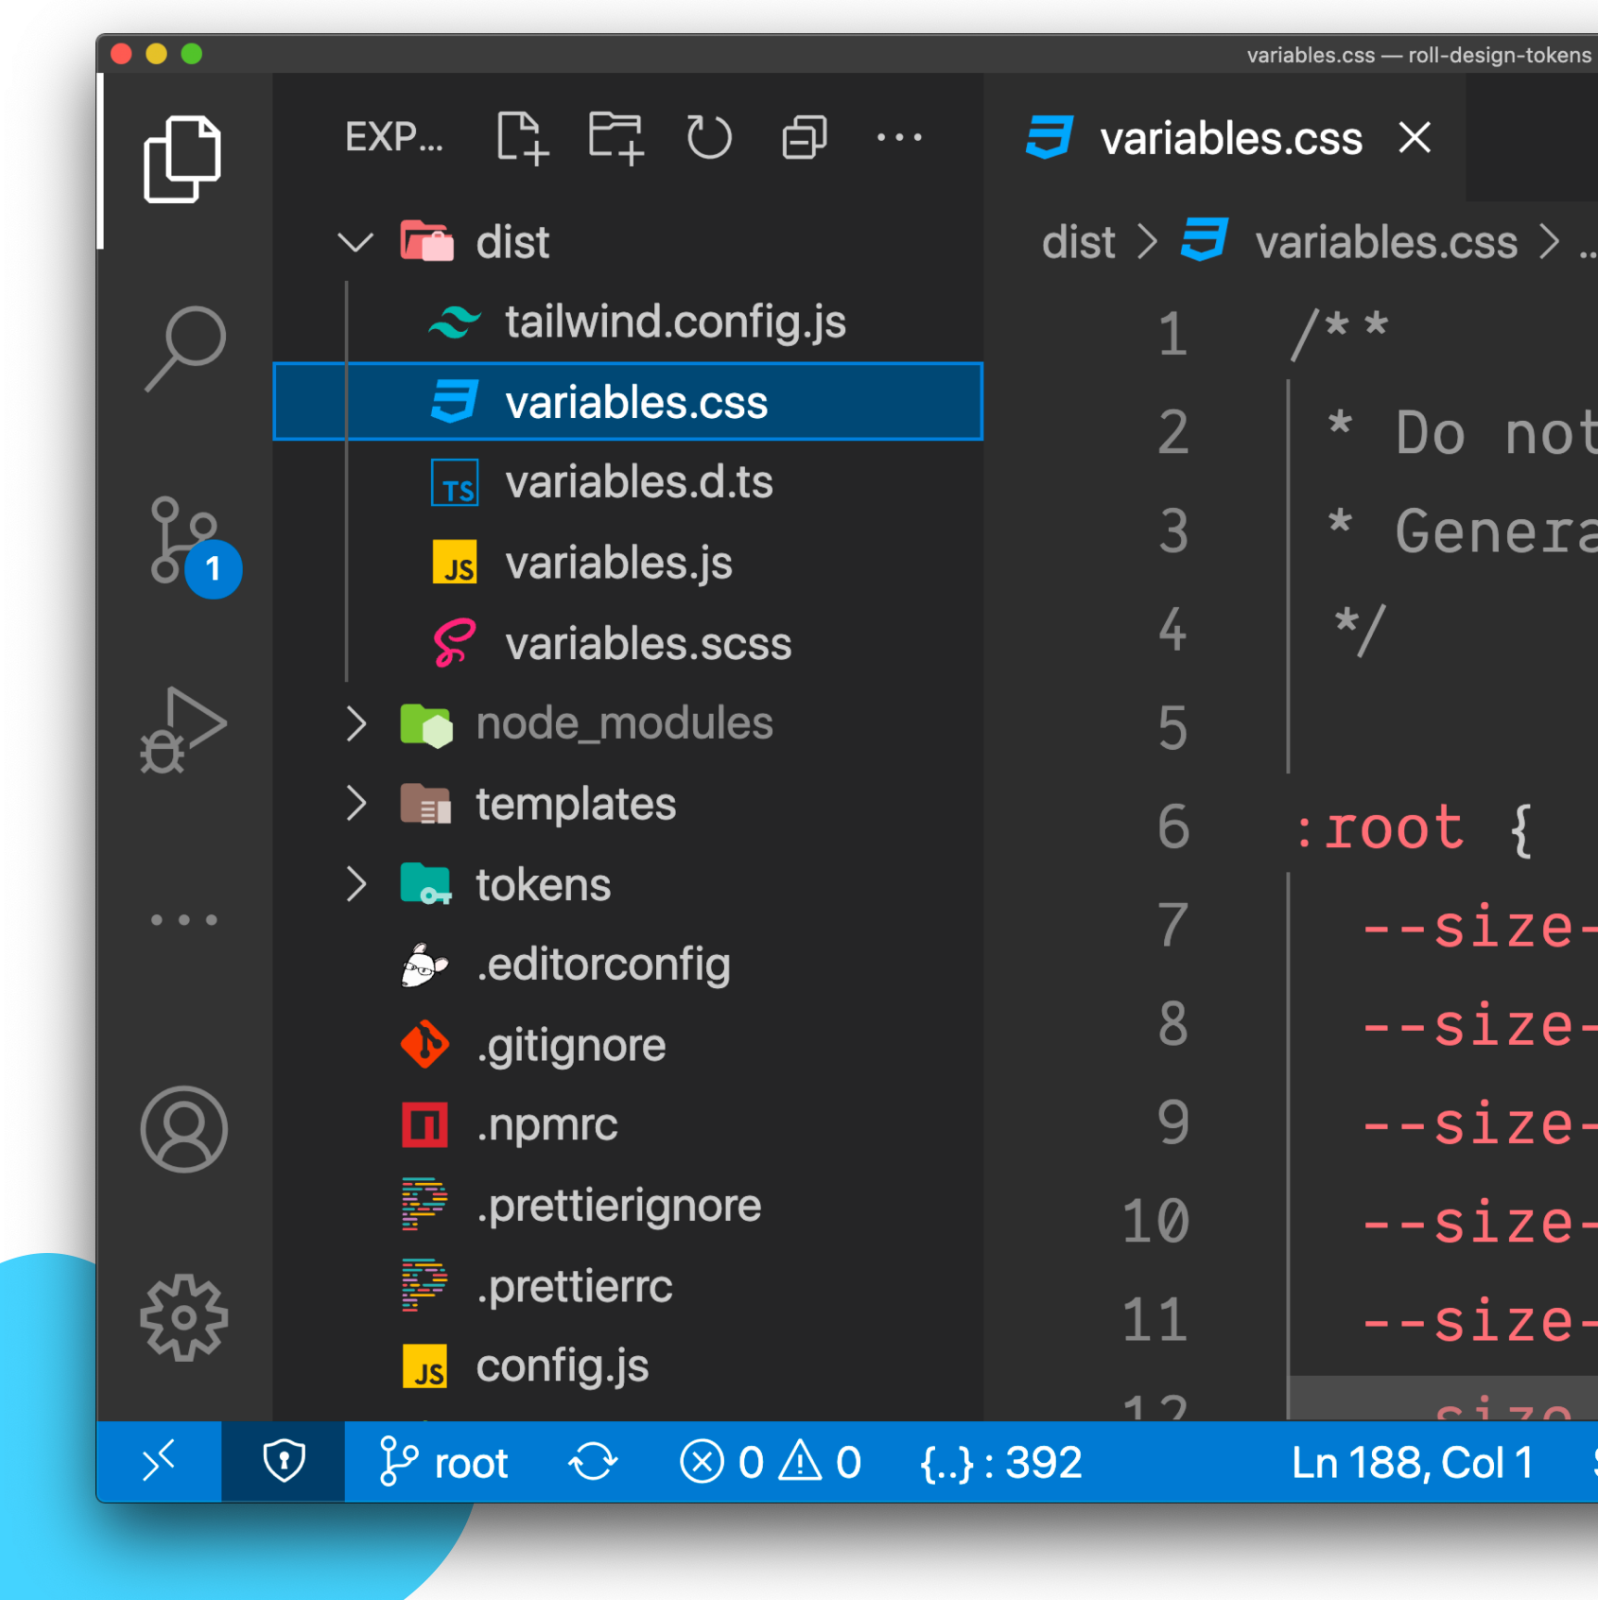 Screenshot of VSCode showing the design tokens repository for Roll by ADP